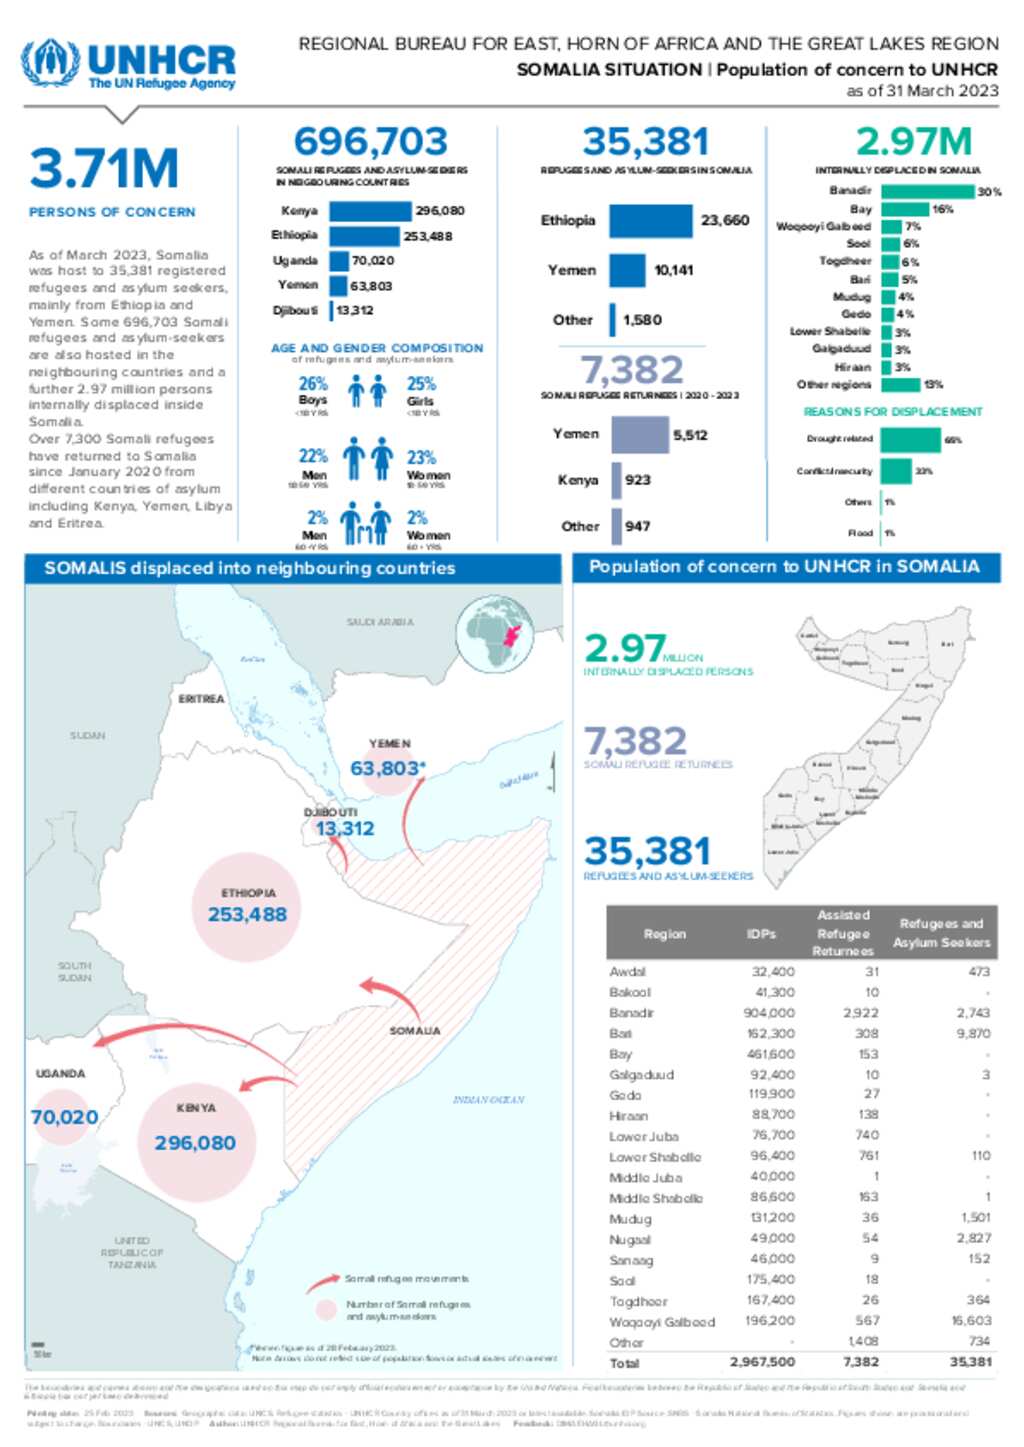 Document Somalia Situation Population Dashboard 31 March 2023